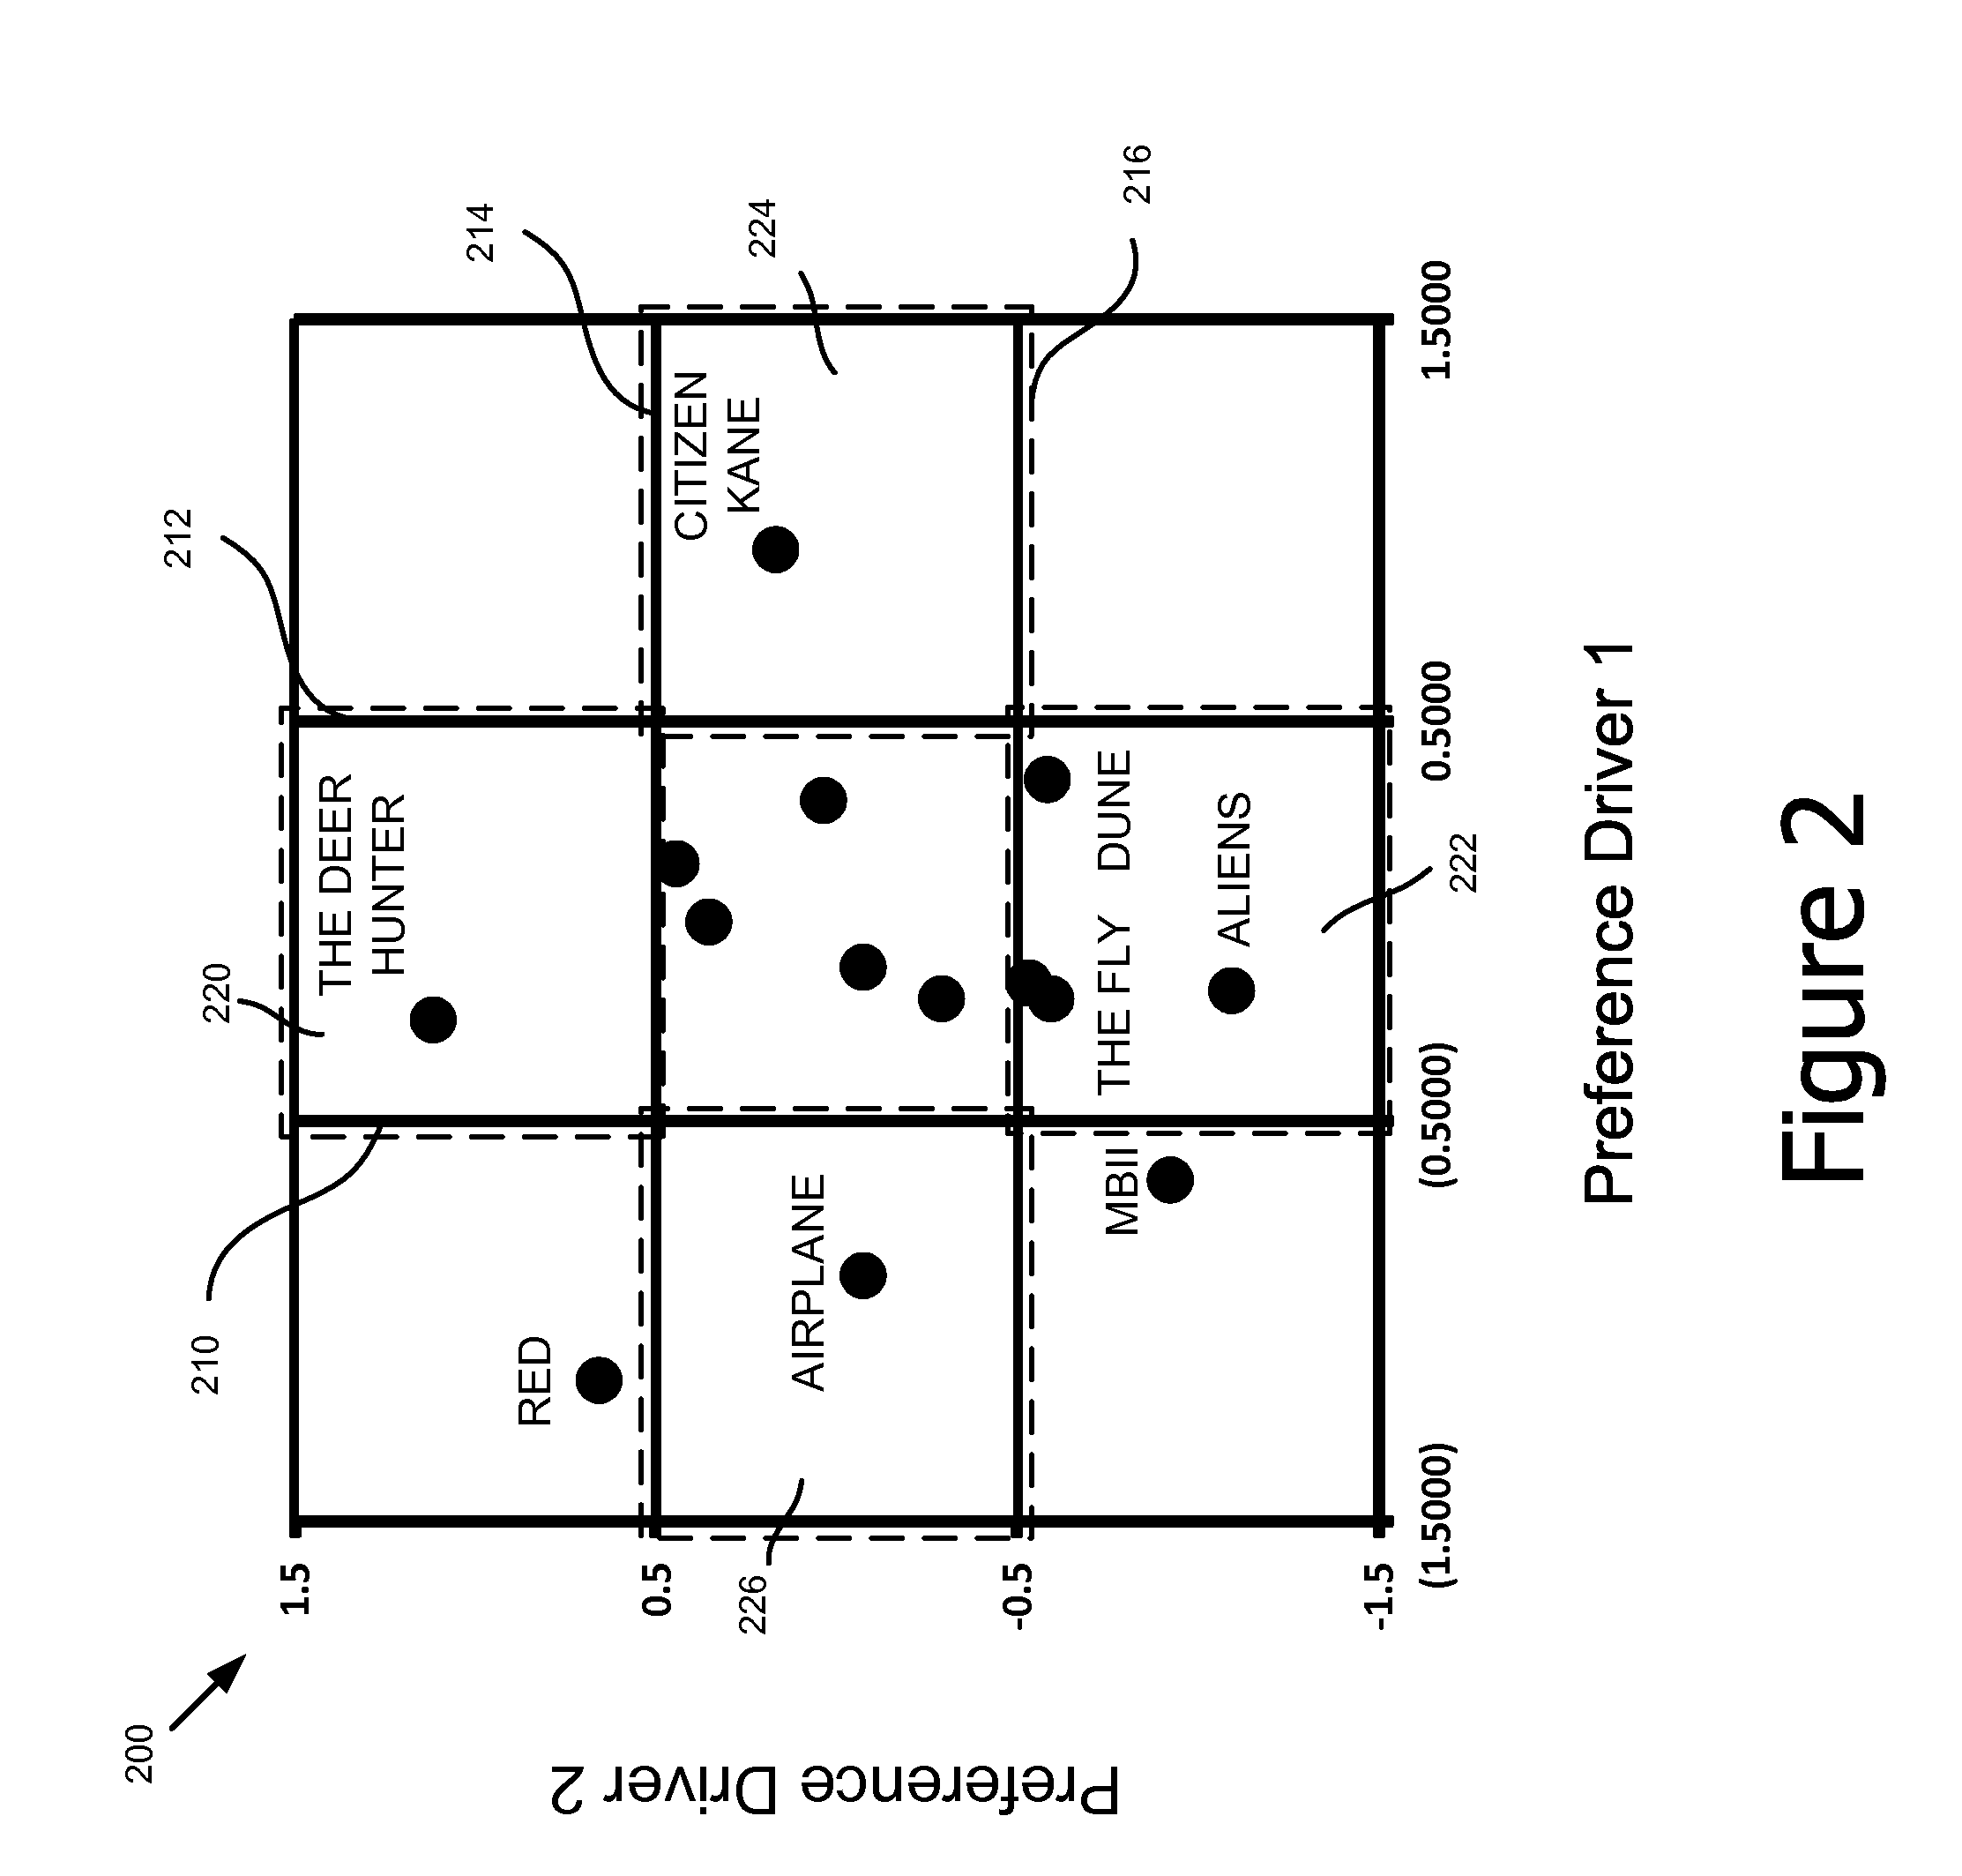 System and method for eliciting information